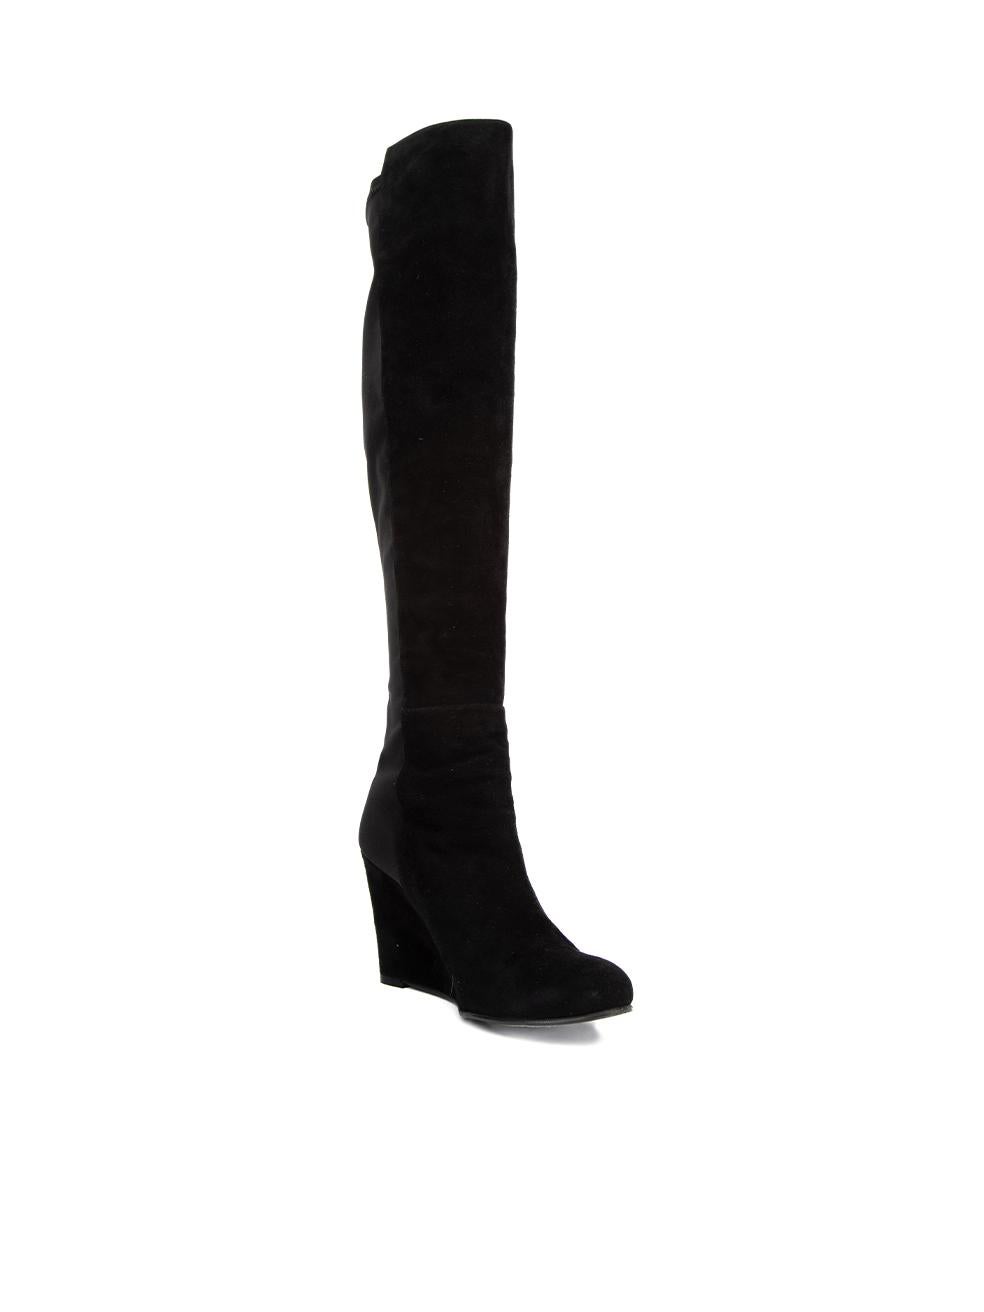 CONDITION is Very good. Hardly any visible wear to boots is evident on this used Stuart Weitzman x Russell Bromley designer resale item. 



Details


Black

Suede

Knee high boots

Wedge high heel

Round toe

Half micro stretch back shaft

Leather